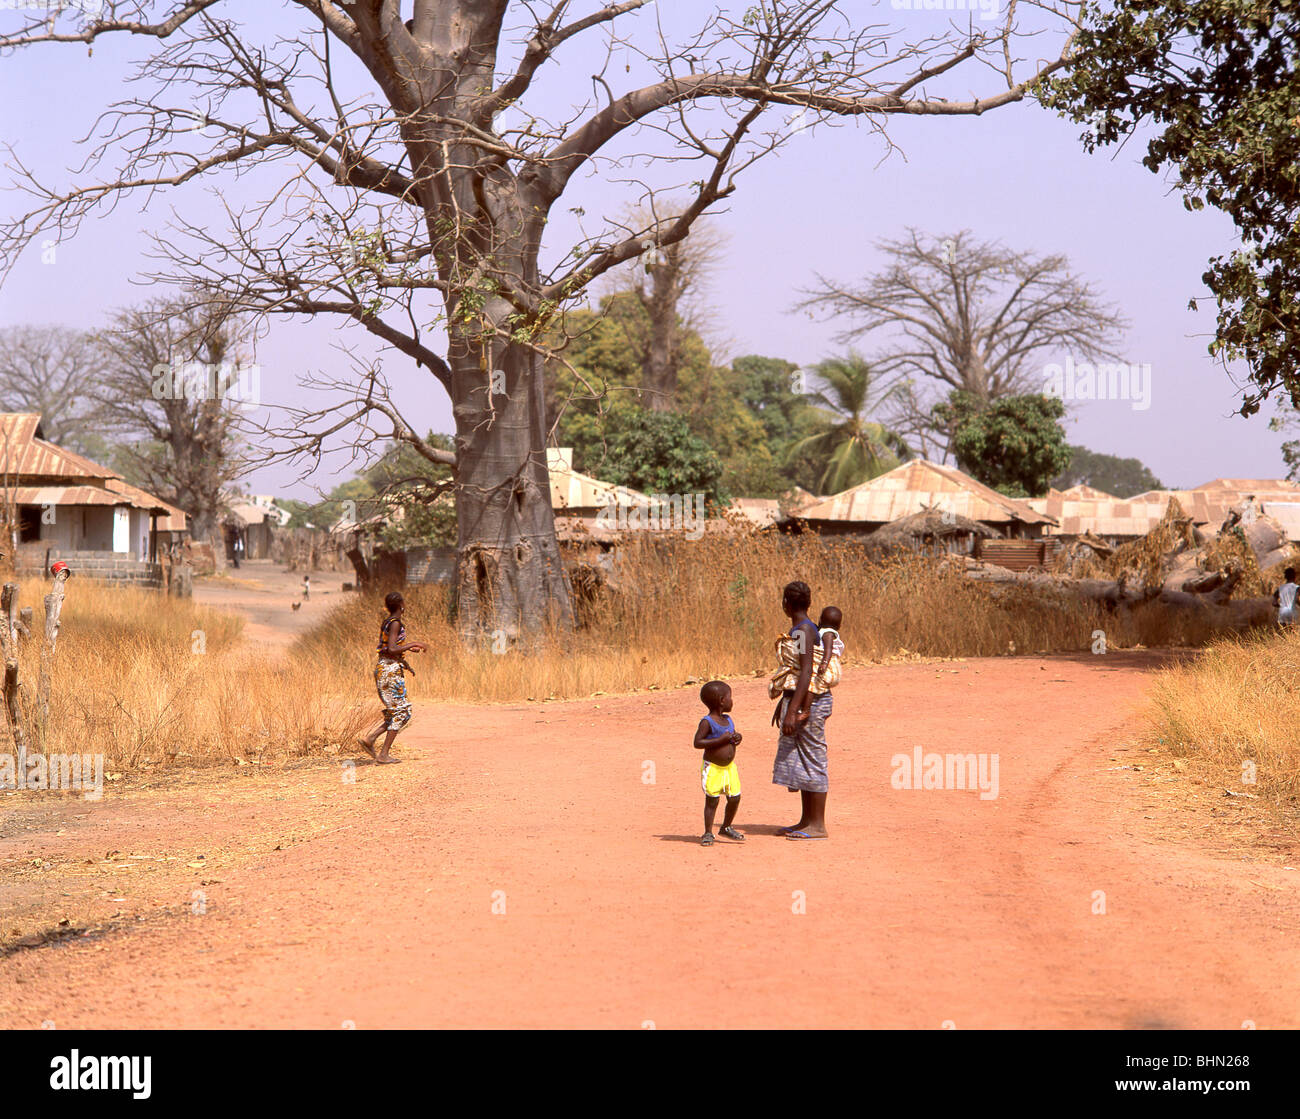 African village compound, Juffure, North Bank, Republic of the Gambia Stock Photo